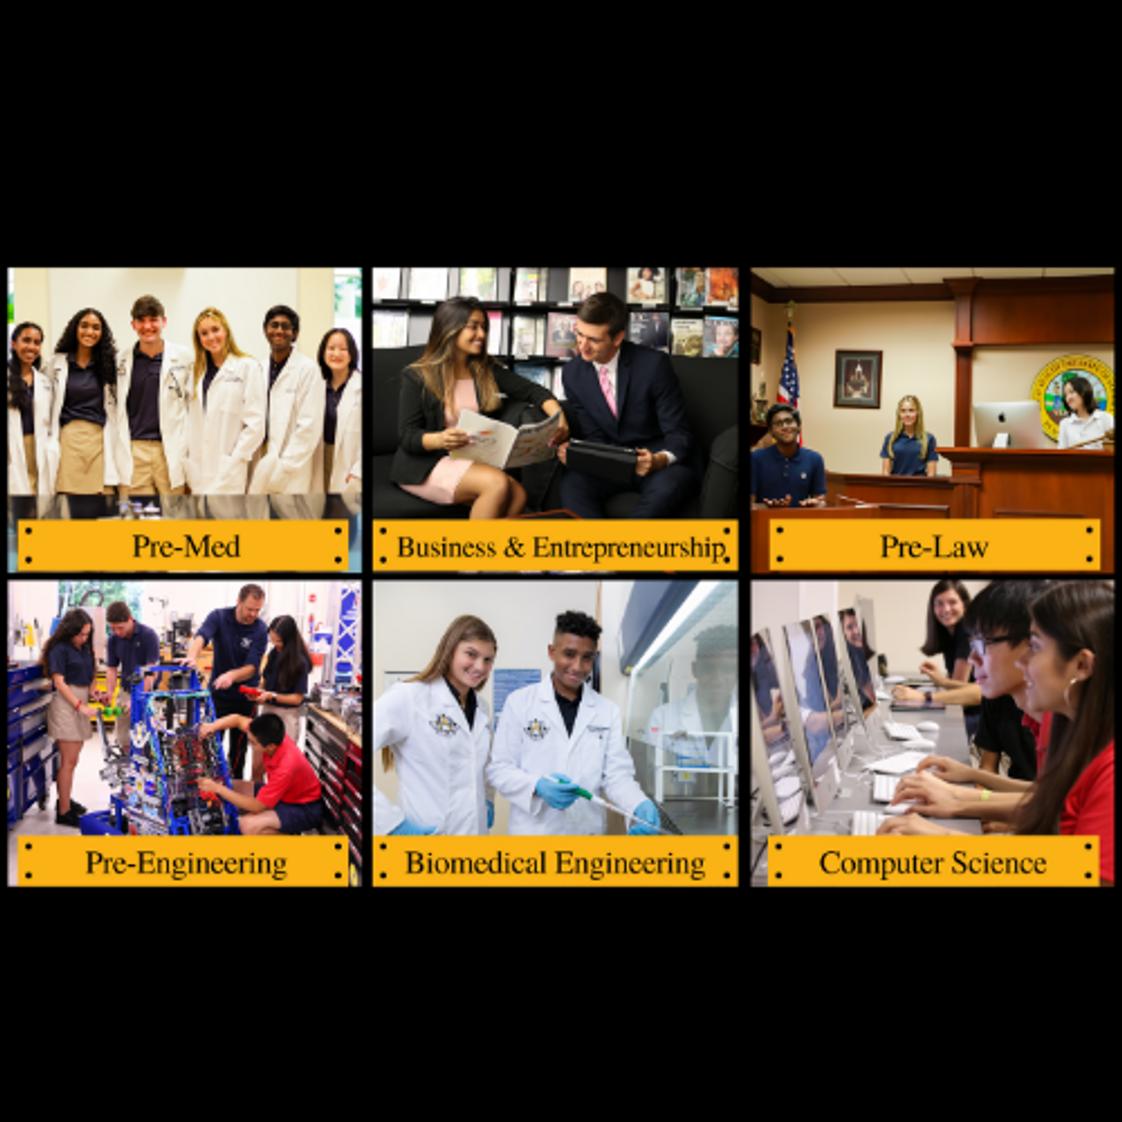 American Heritage Schools, Broward Campus Photo #1 - Over the past twenty years, American Heritage Schools has developed six distinct professional programs in biomedical engineering, business, computer science, engineering, law, and medicine. Each program is taught daily by professionals in their respective fields. The Heritage curriculum team, in conjunction with the lawyers, judges, doctors, entrepreneurs, and engineers that make up the pre-professional faculty, worked to create unique classes.